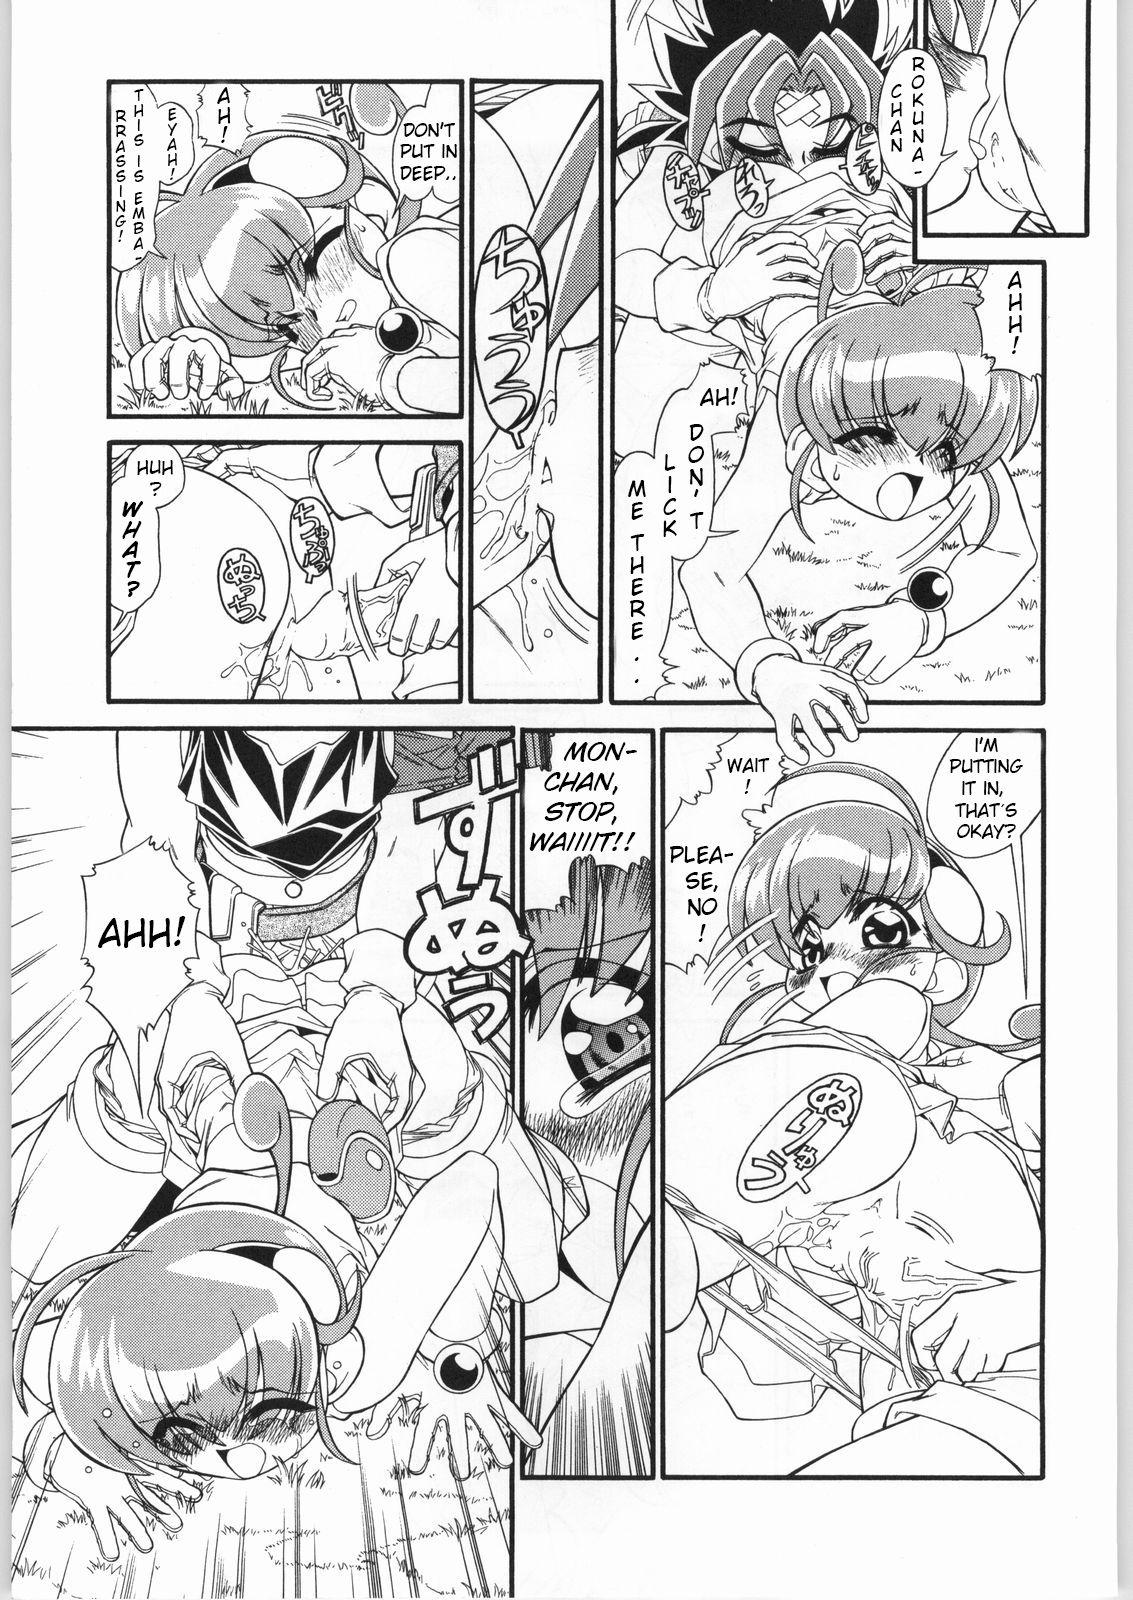 Women Fucking M.F.H.H.MN REVISE - Mon colle knights Interracial Sex - Page 4